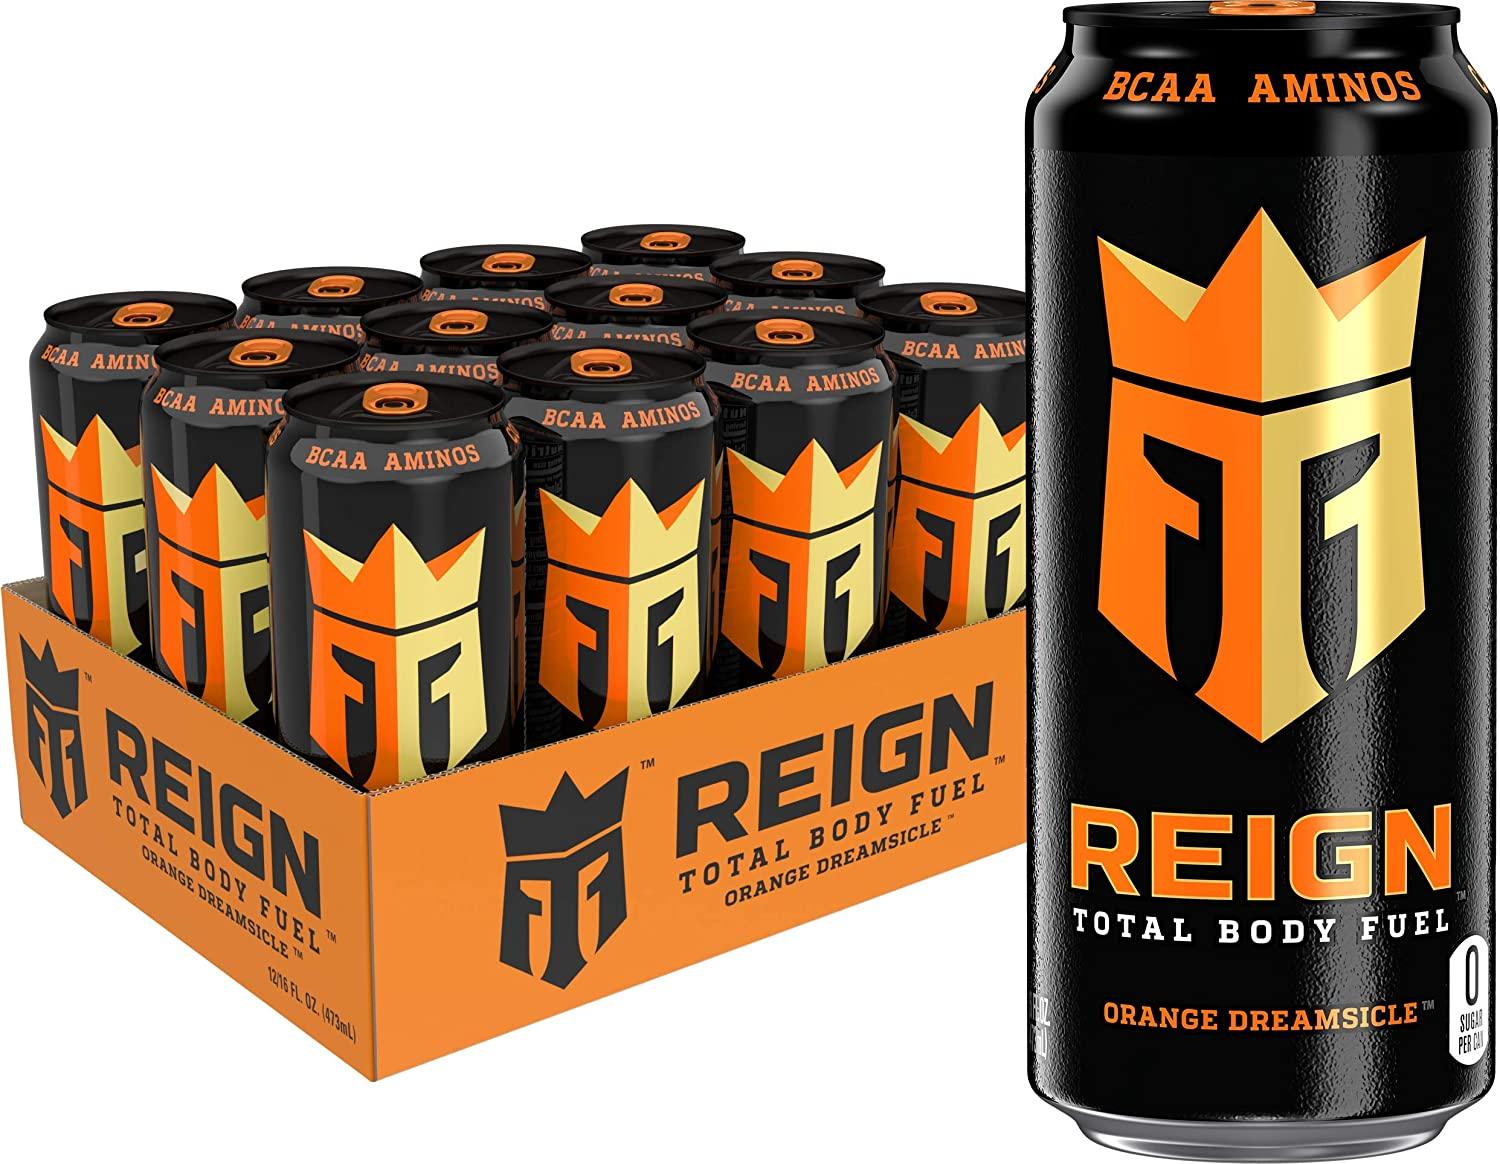 12 Reign Total Body Fuel Fitness Energy Drink for $12.04 Shipped